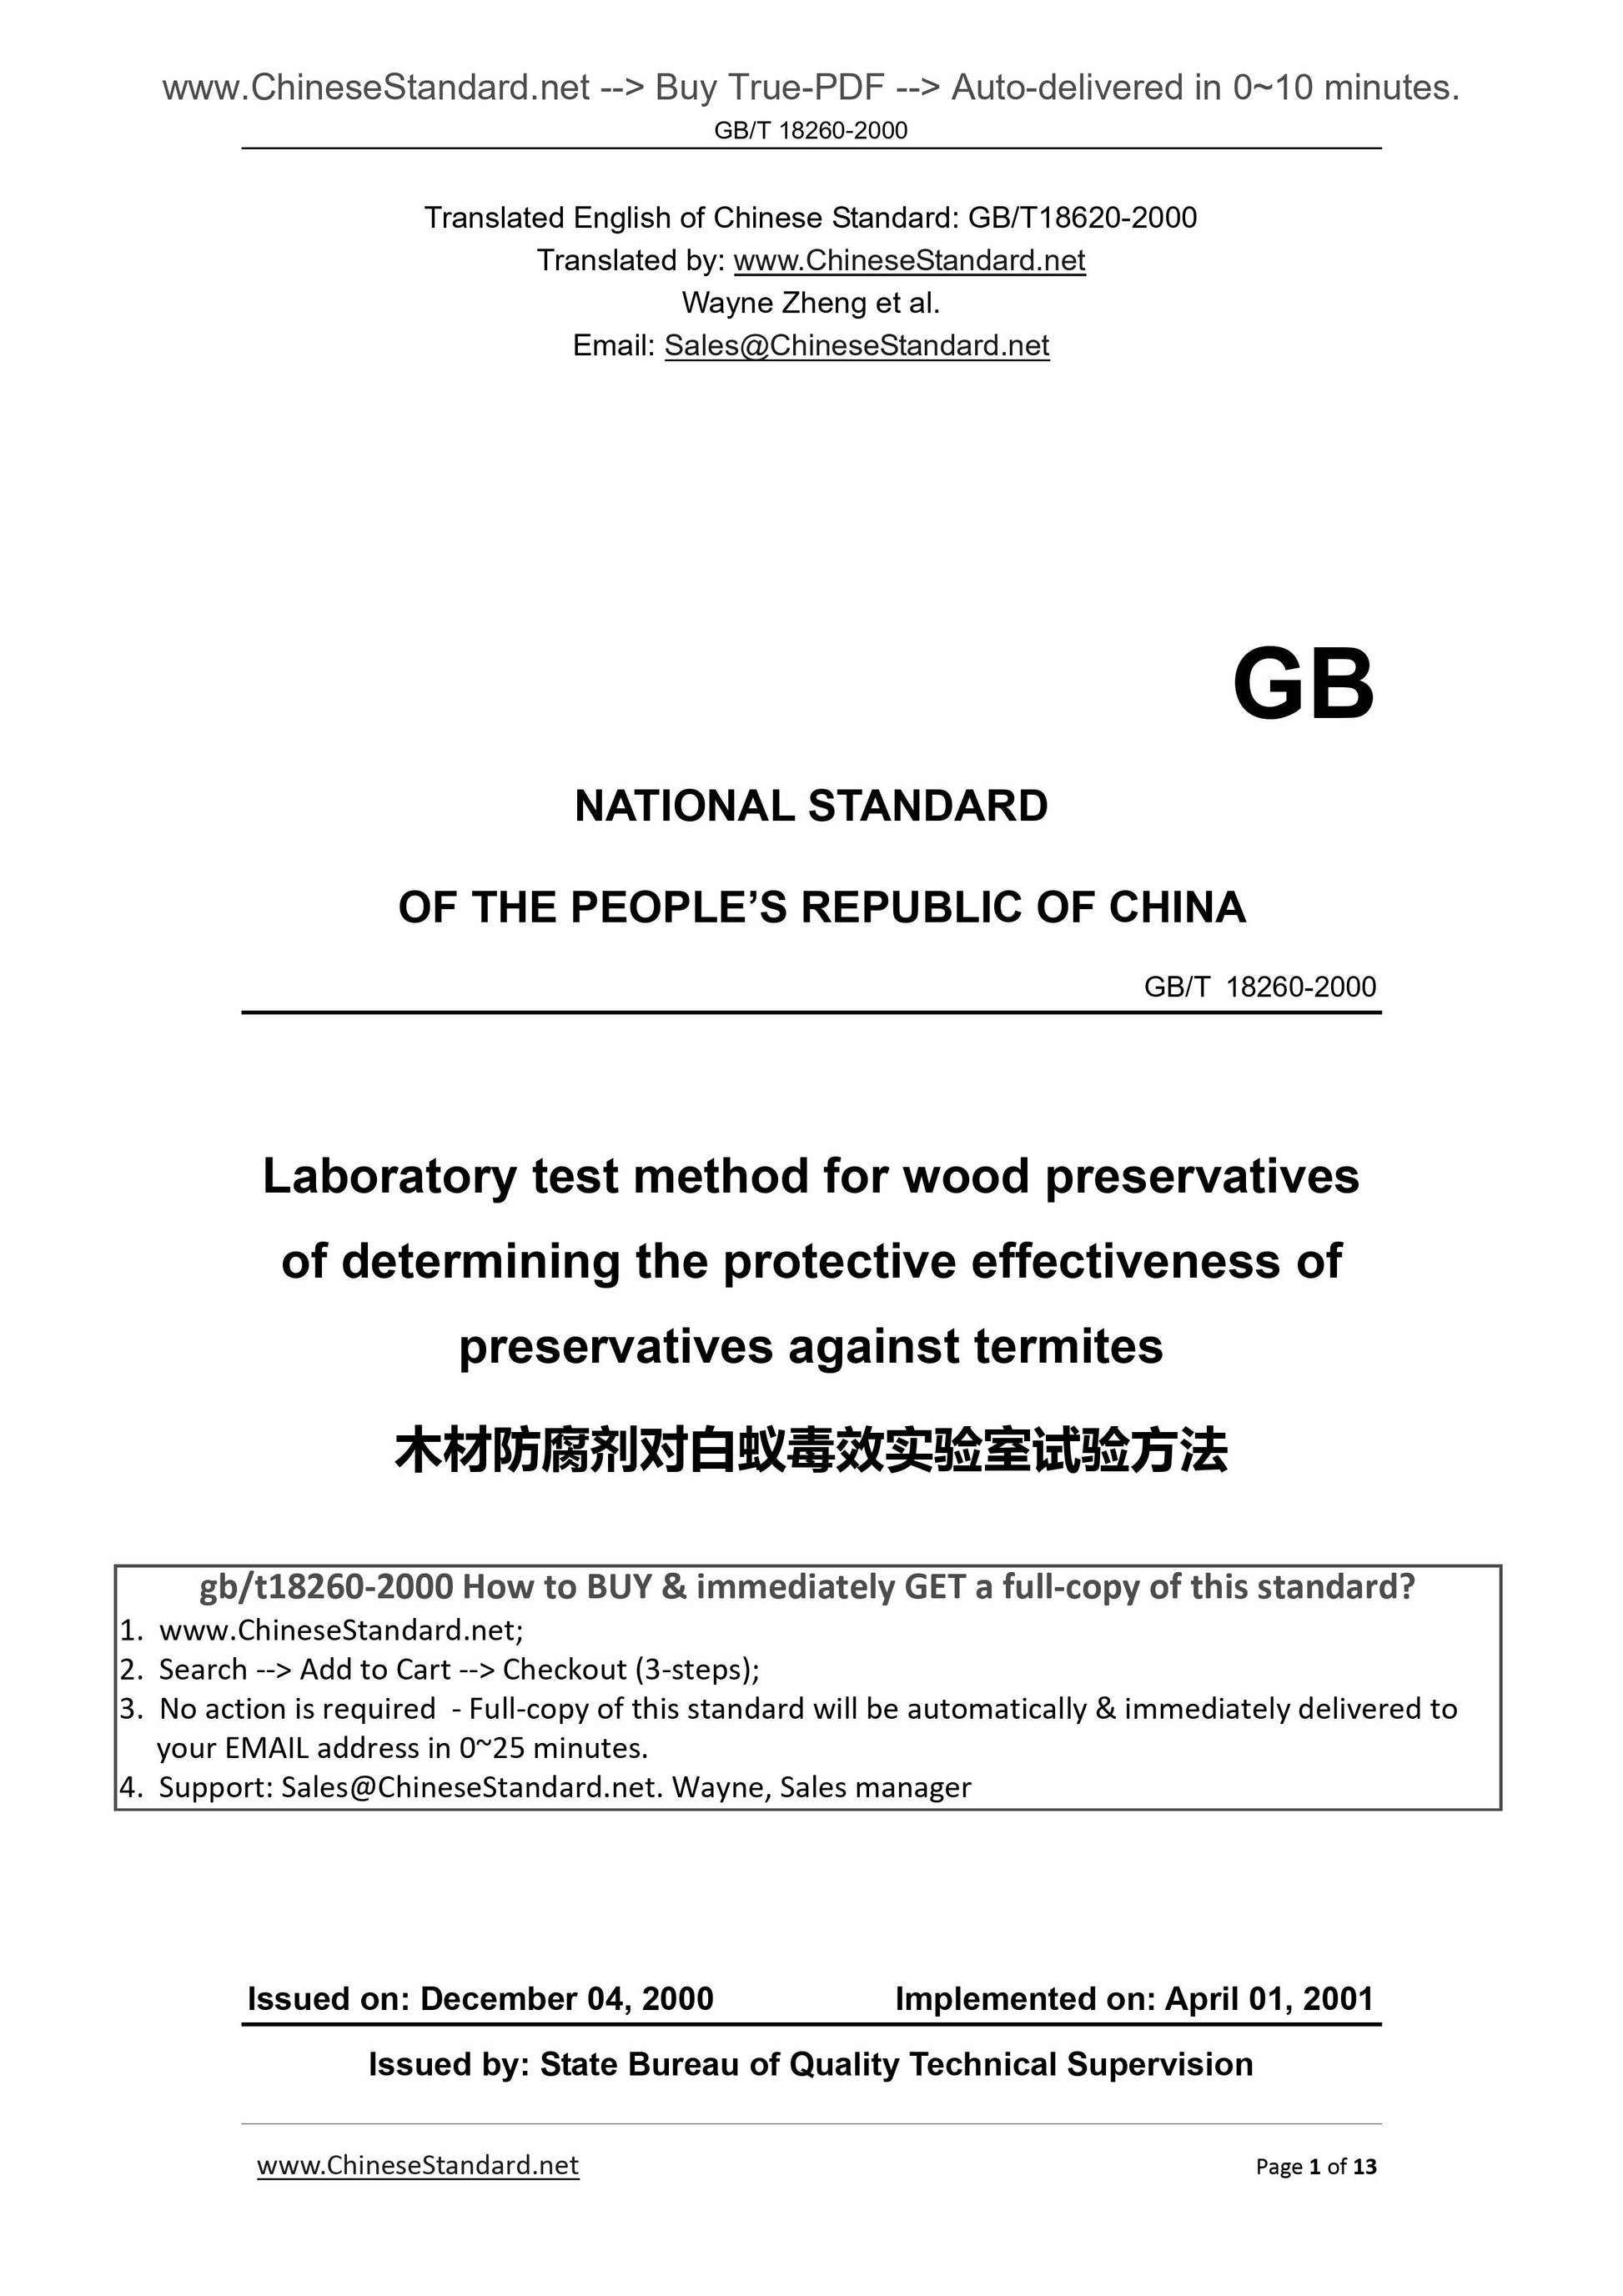 GB/T 18260-2000 Page 1